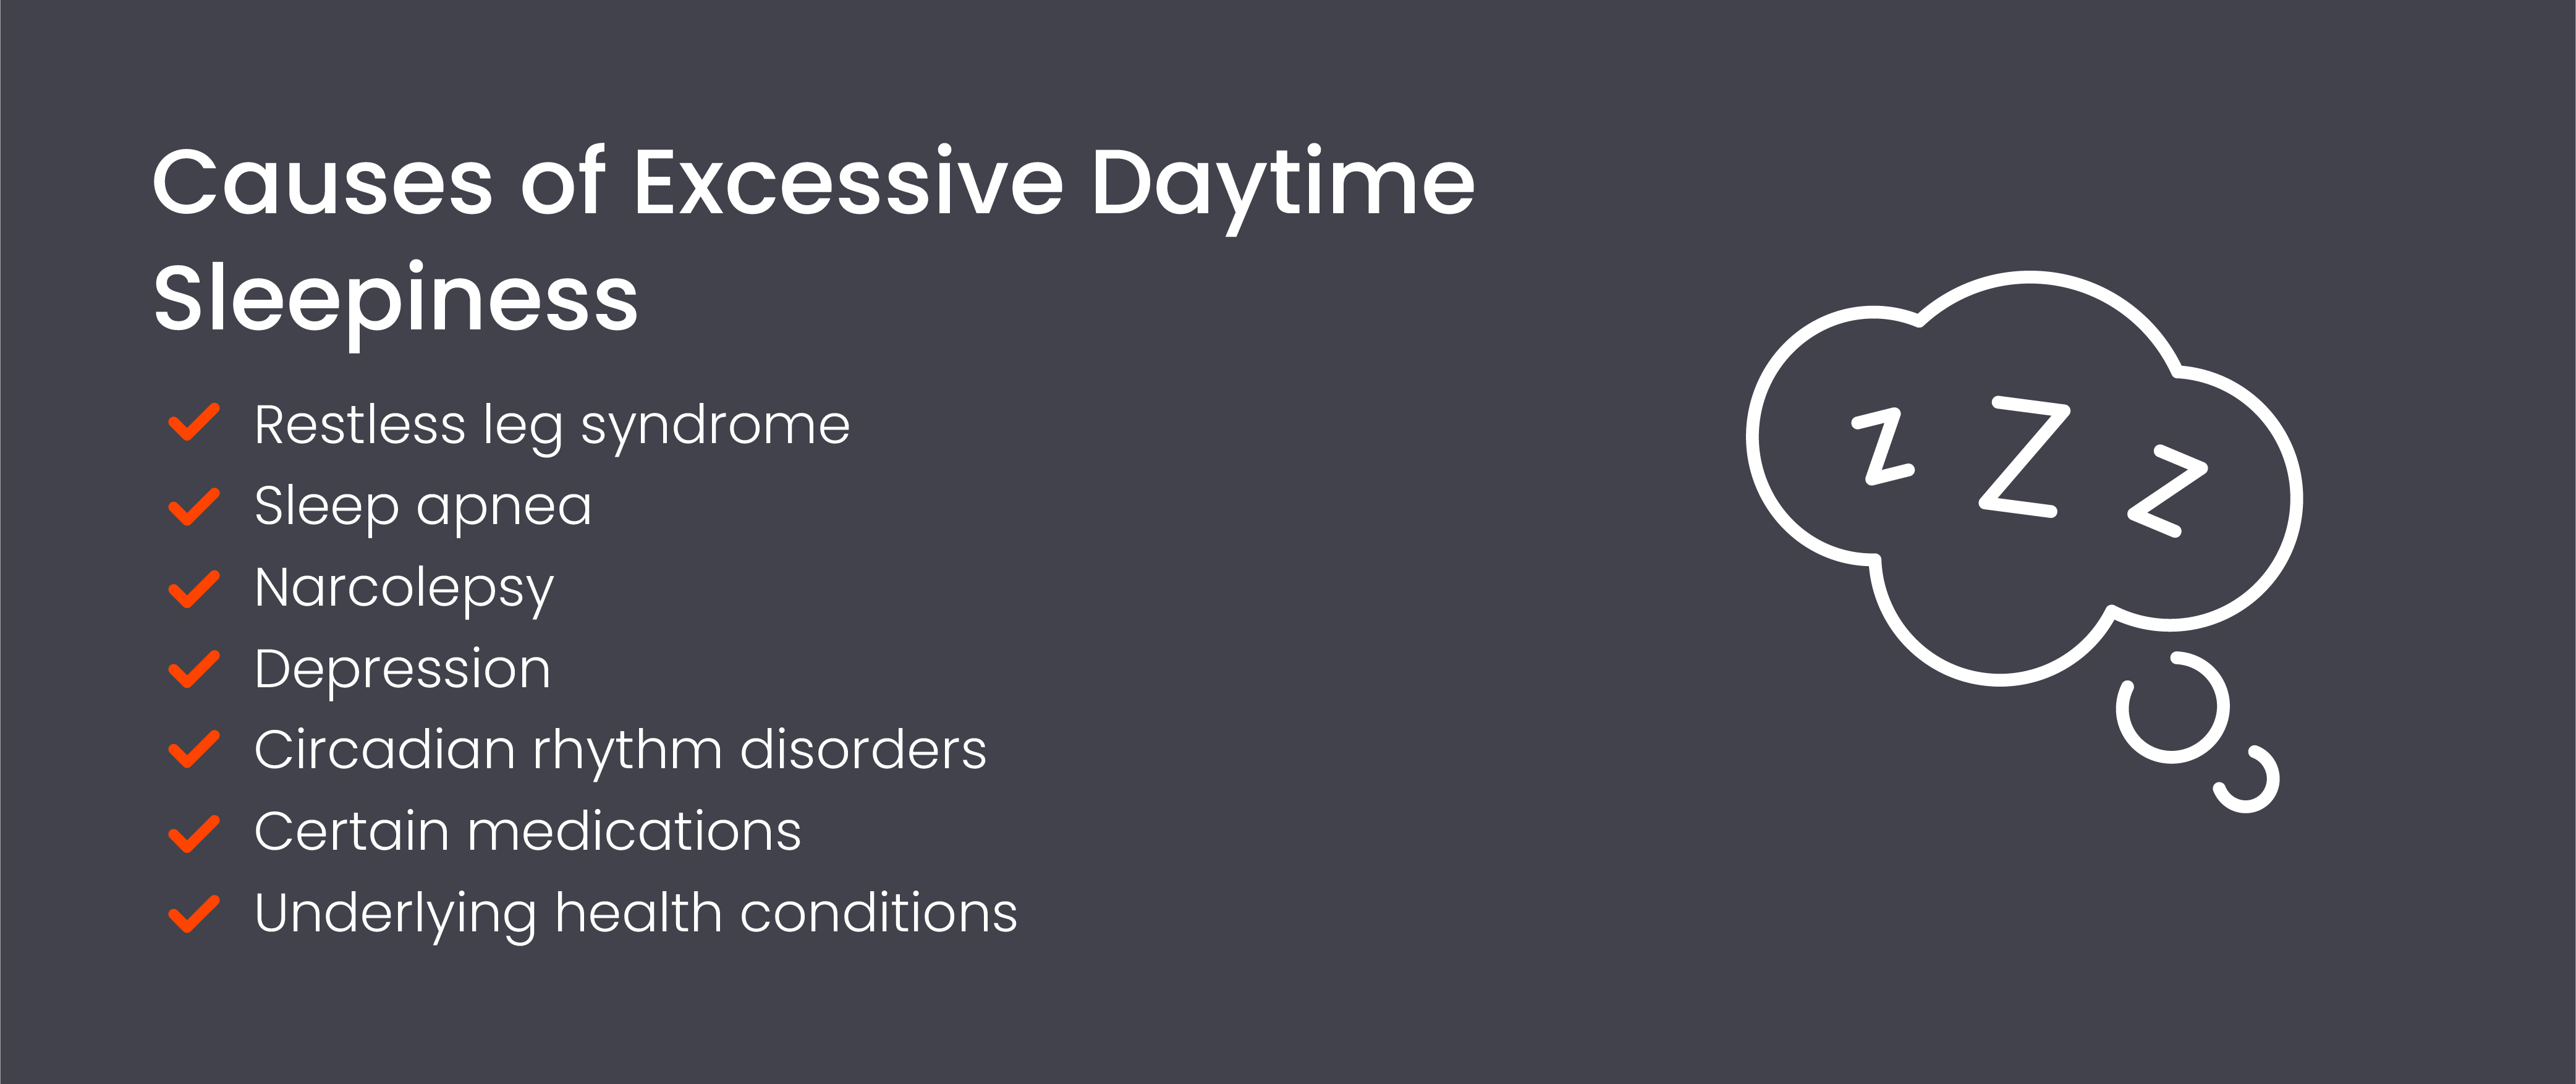 Causes of excessive daytime sleepiness